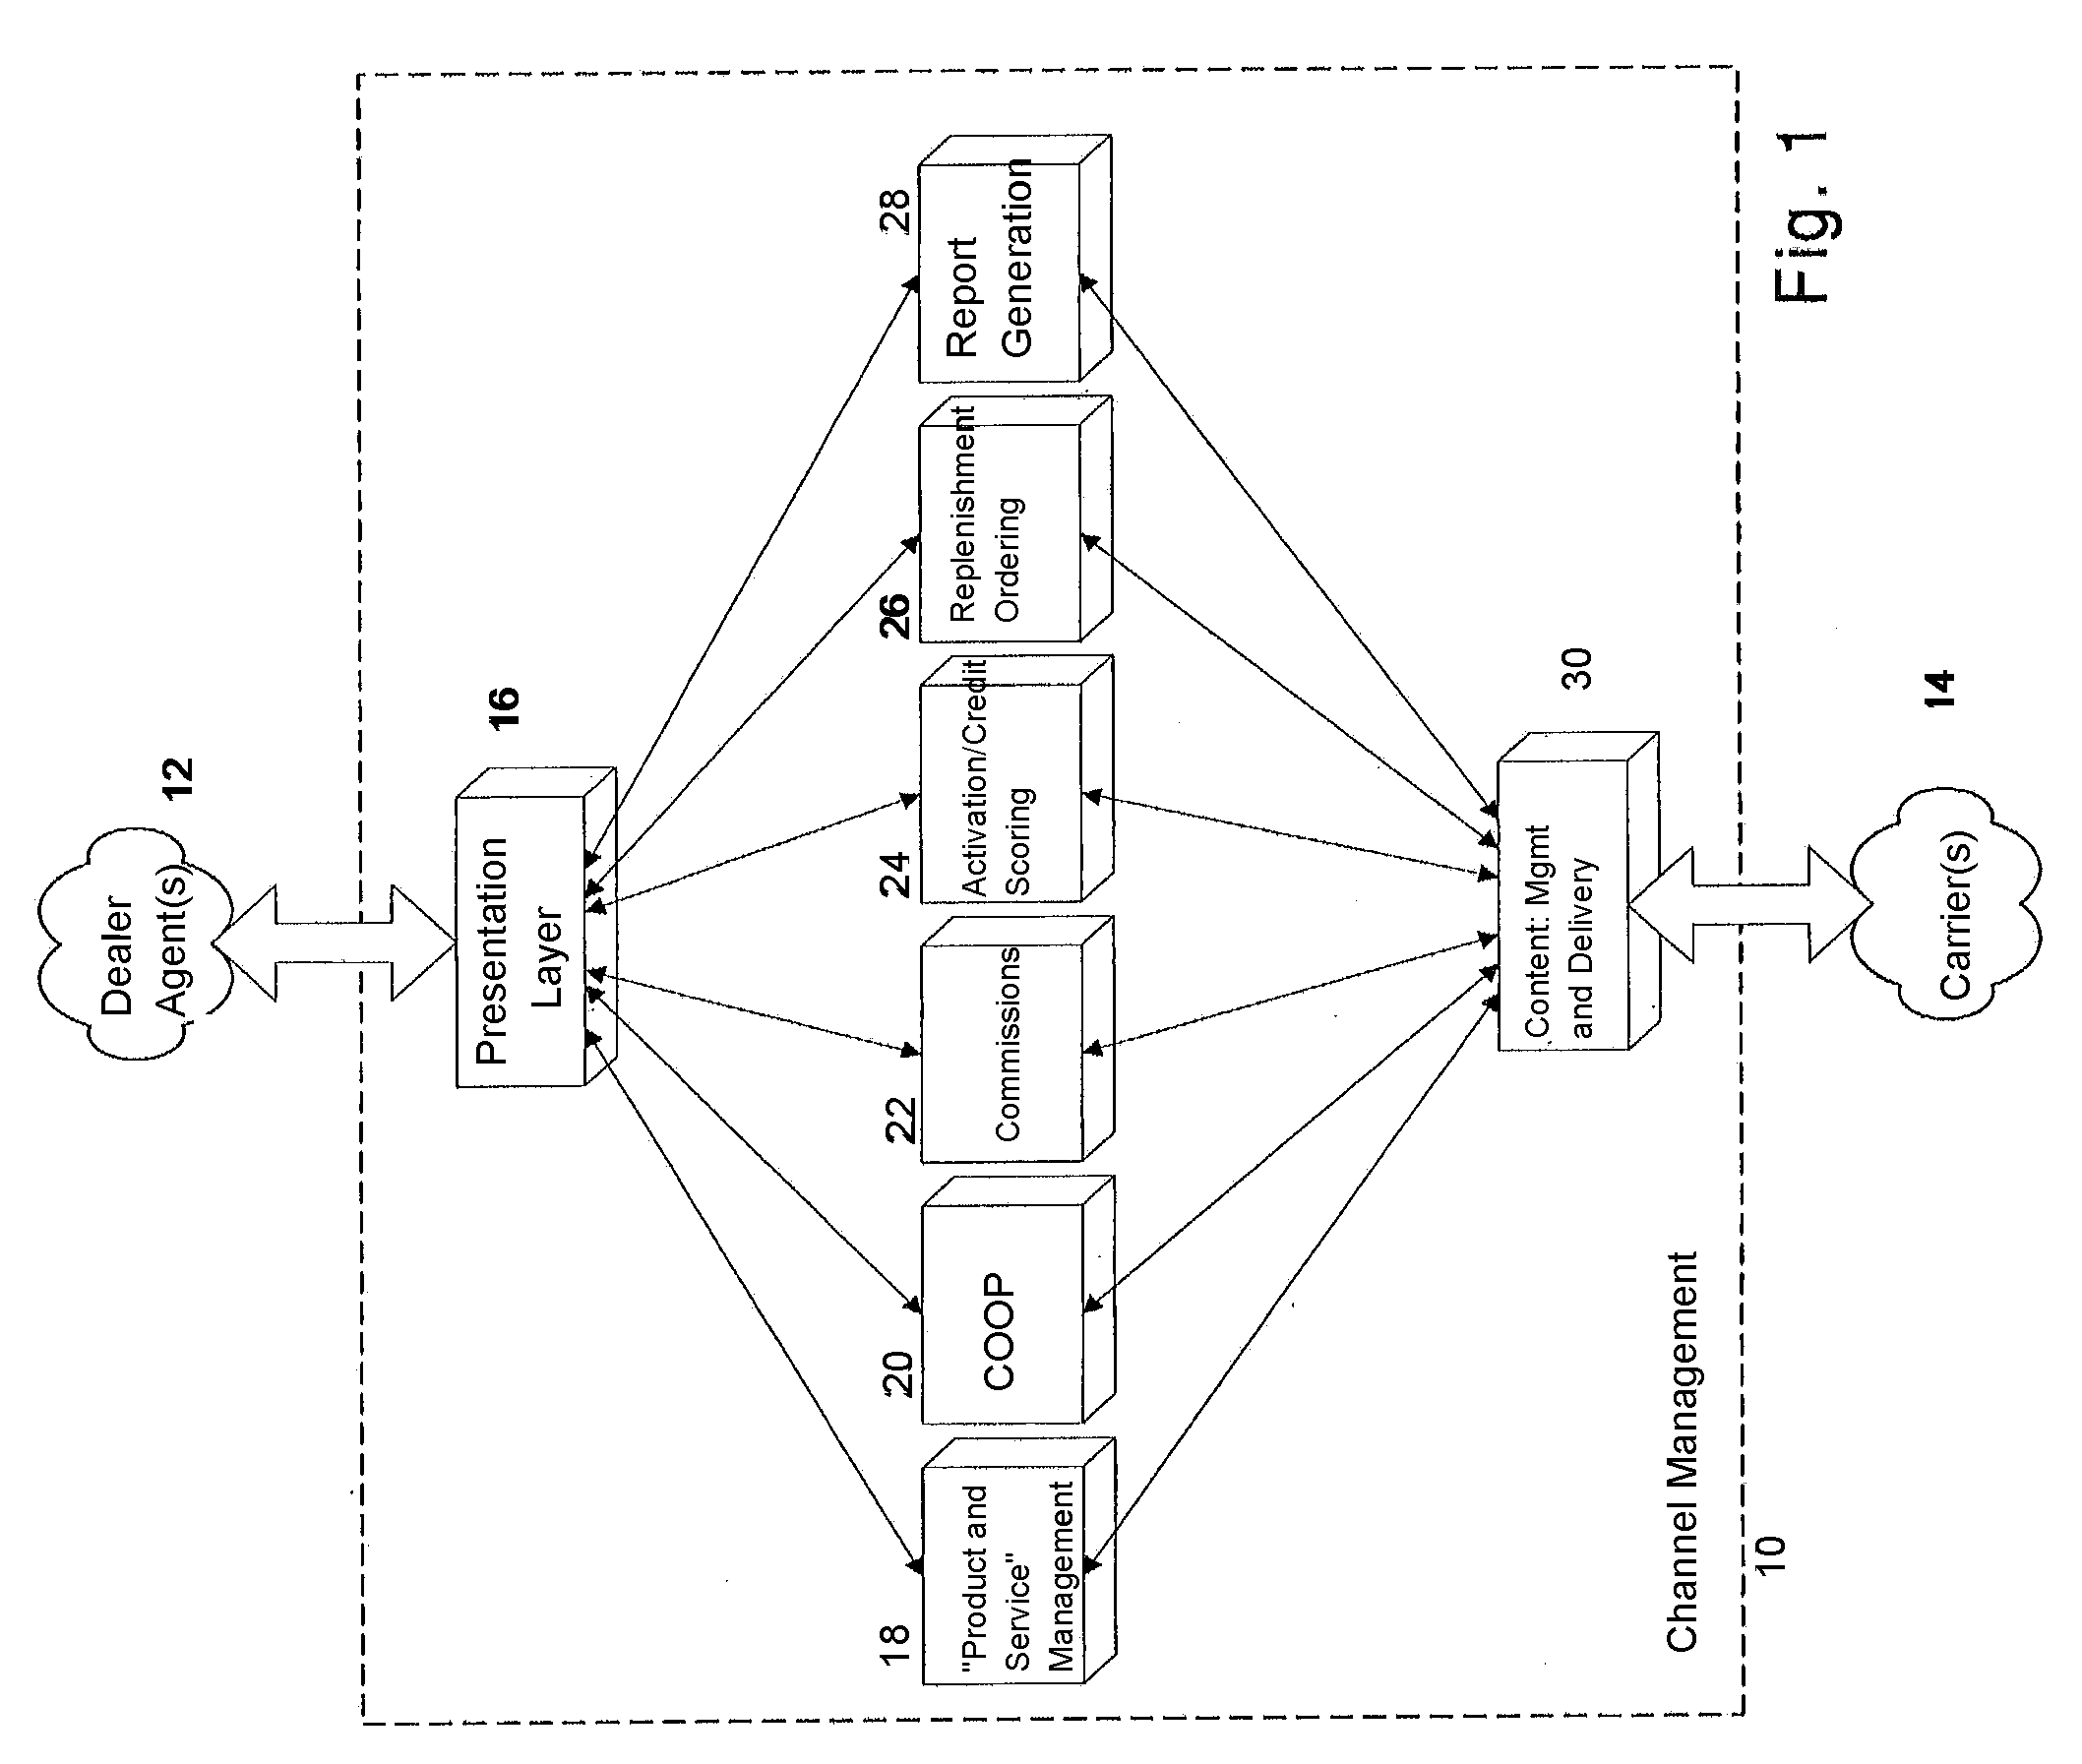 Distribution channel management for wireless devices and services